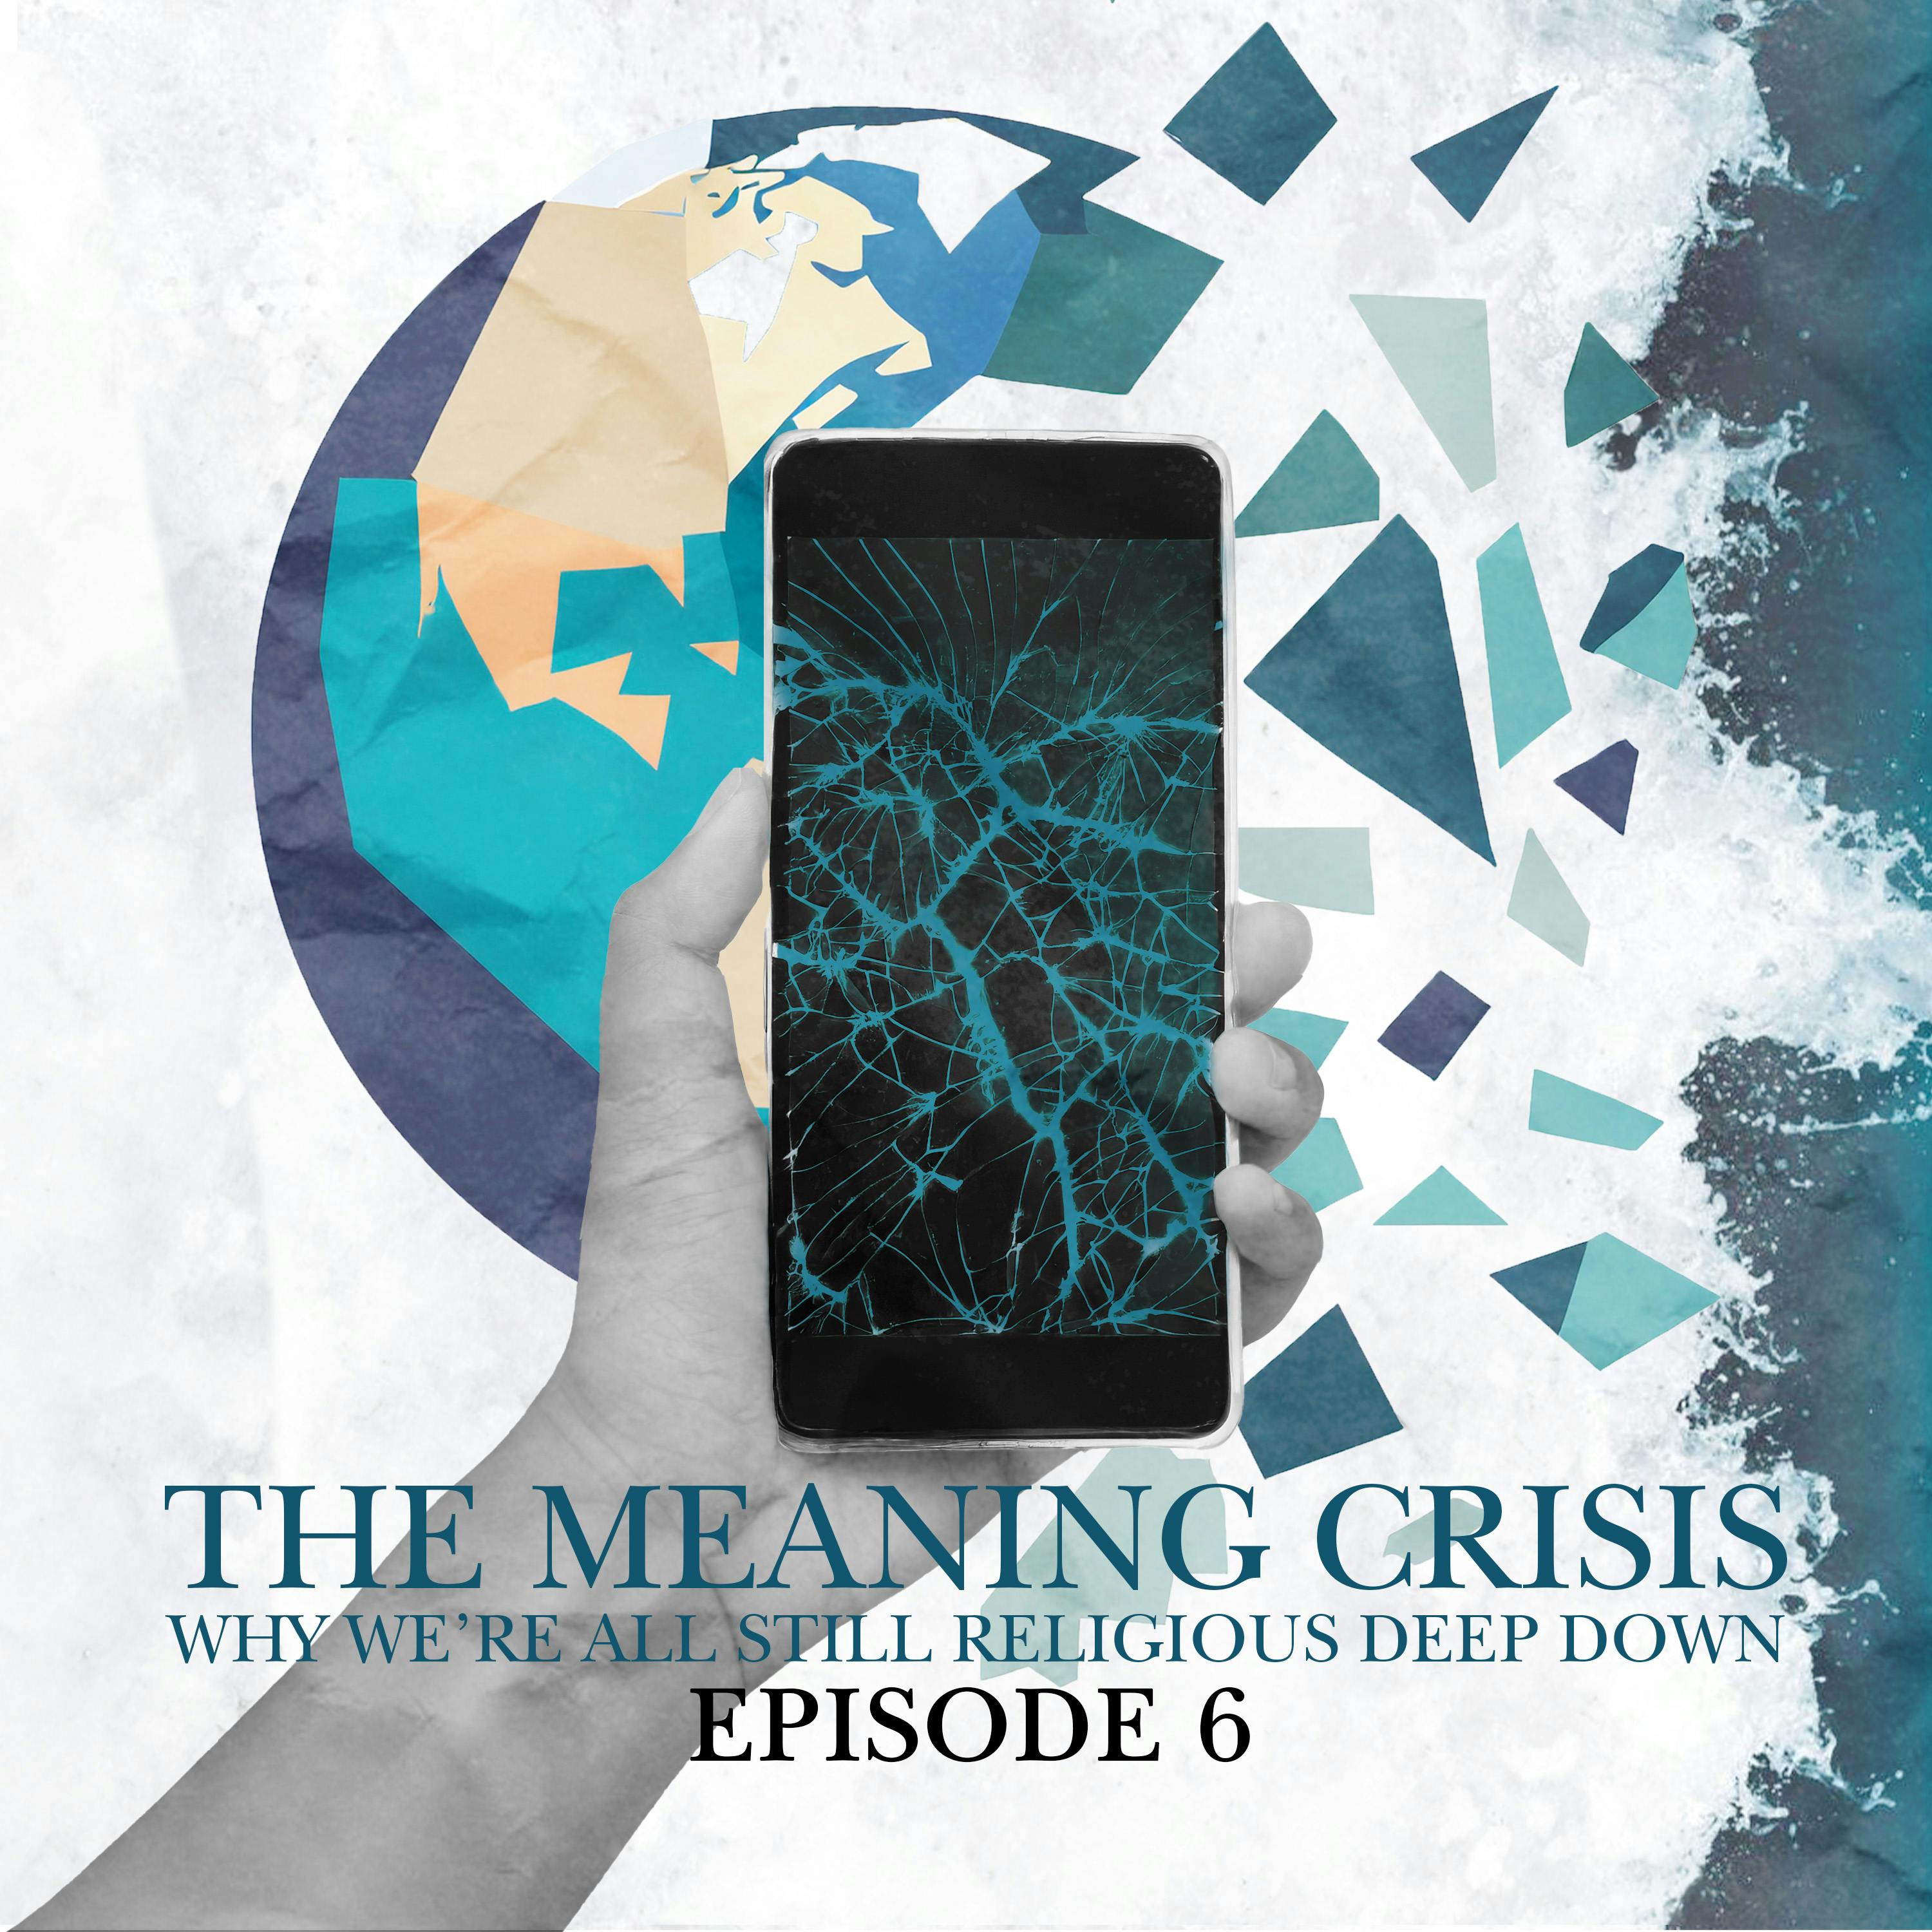 6. The Meaning Crisis: Why we're all religious deep down